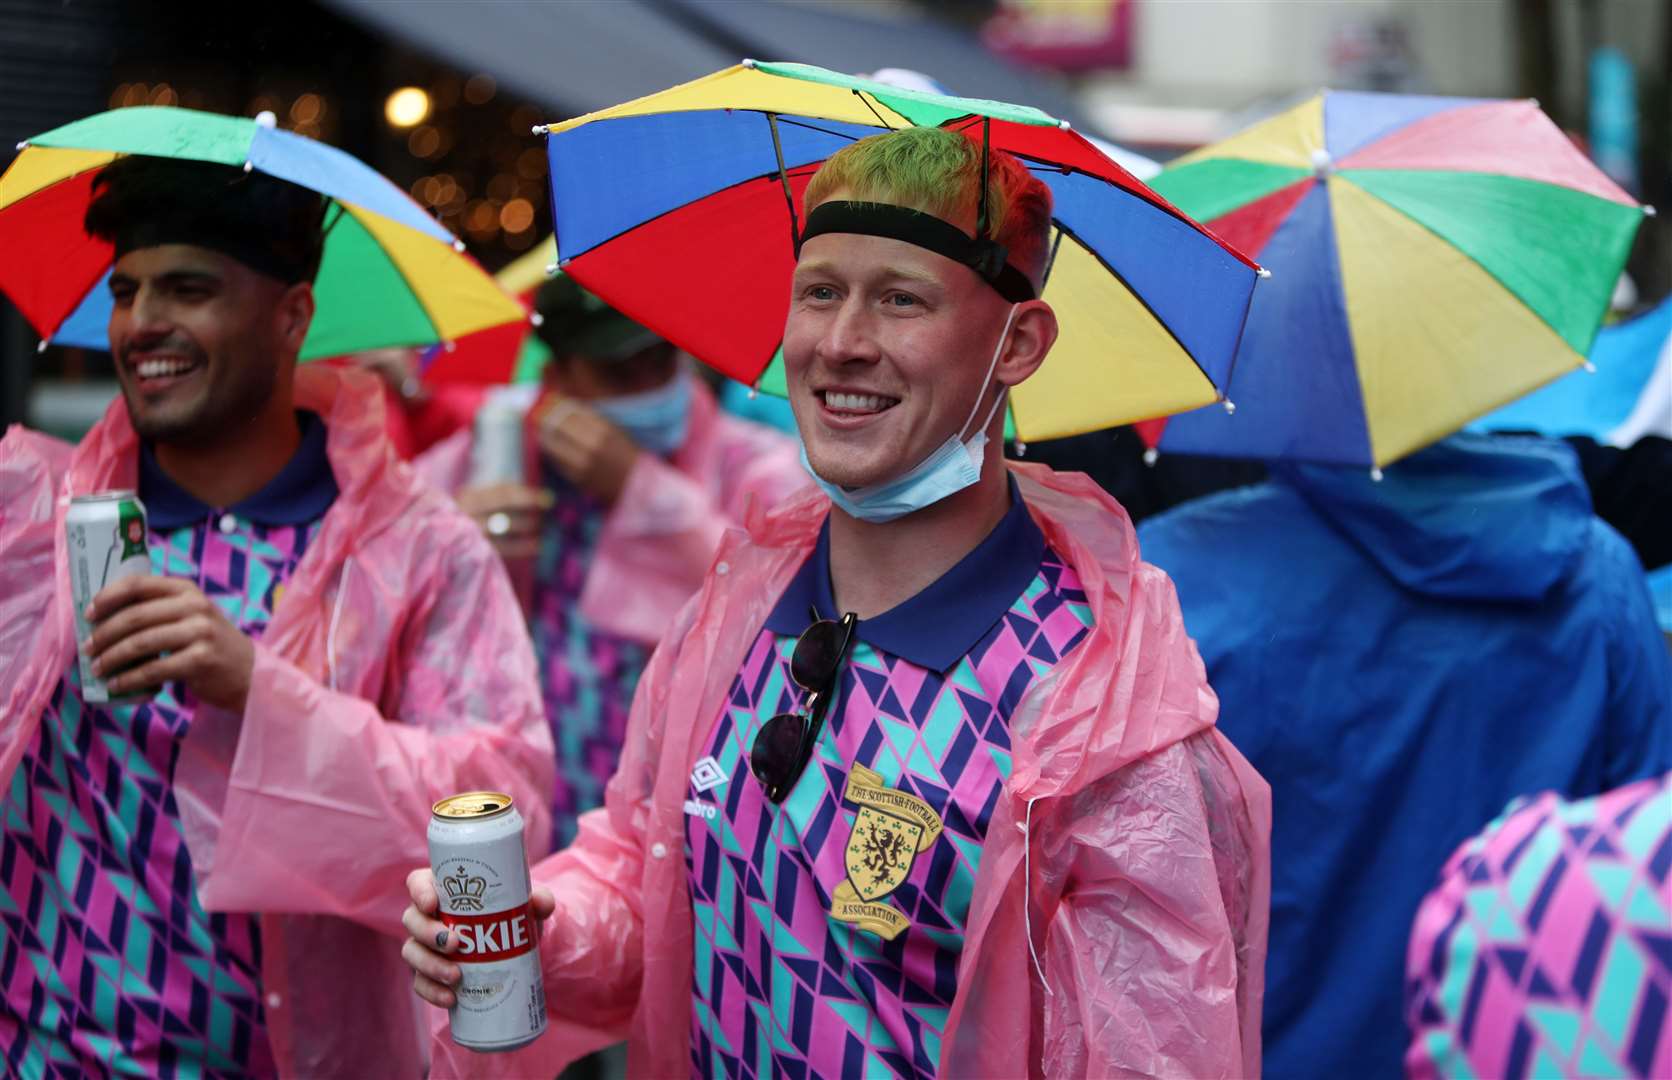 Thousands of Scotland fans are in London for the match against England at Wembley (Keiran Cleeves/PA)